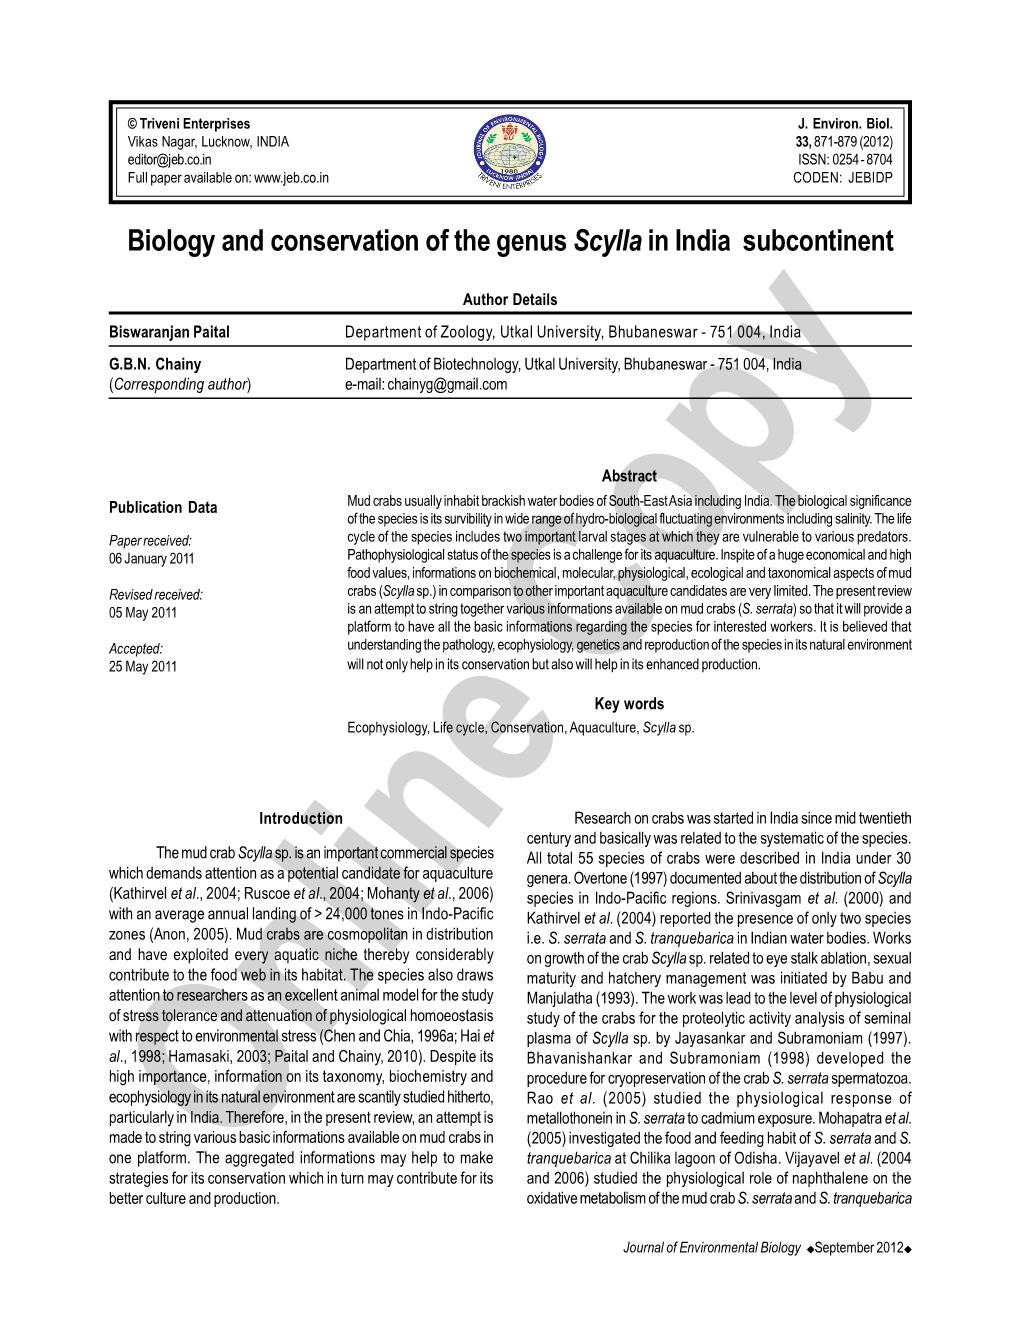 Biology and Conservation of the Genus Scylla in India Subcontinent